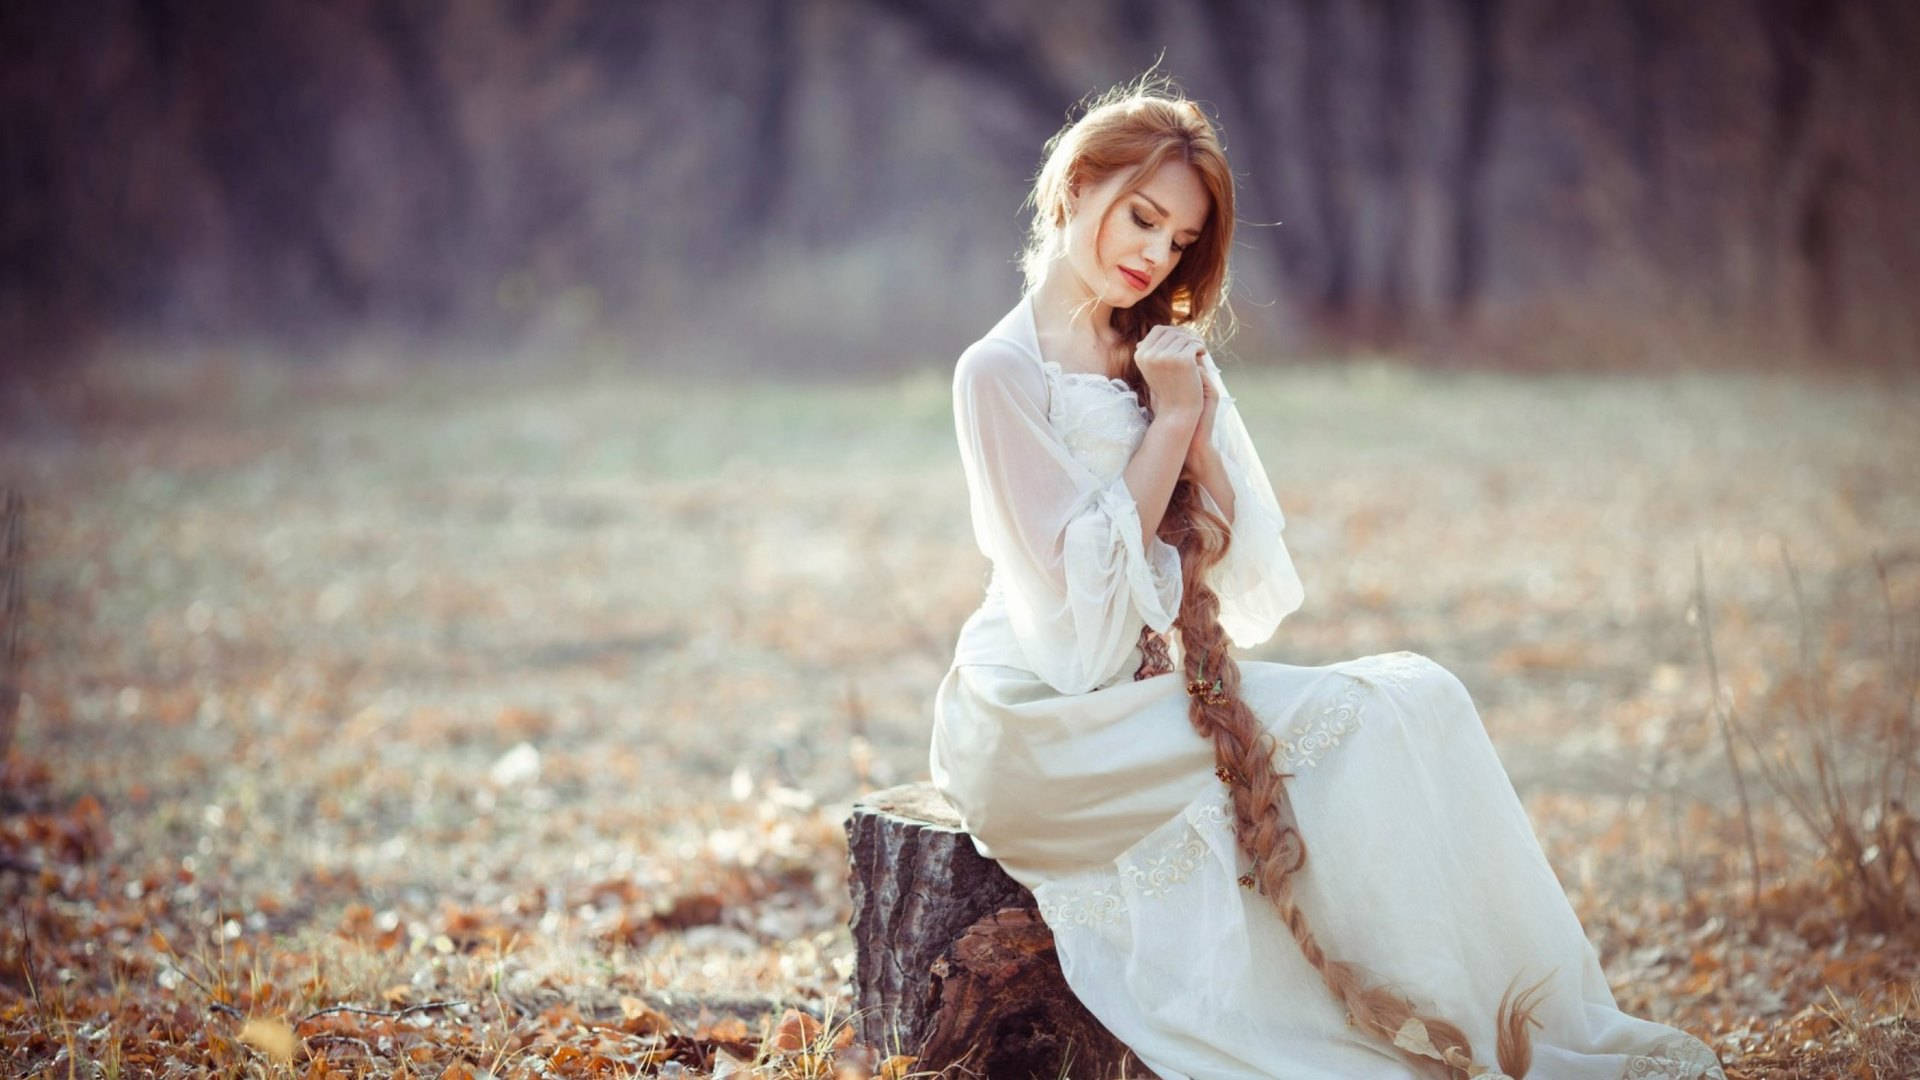 Elegant Lady Alone In The Woods